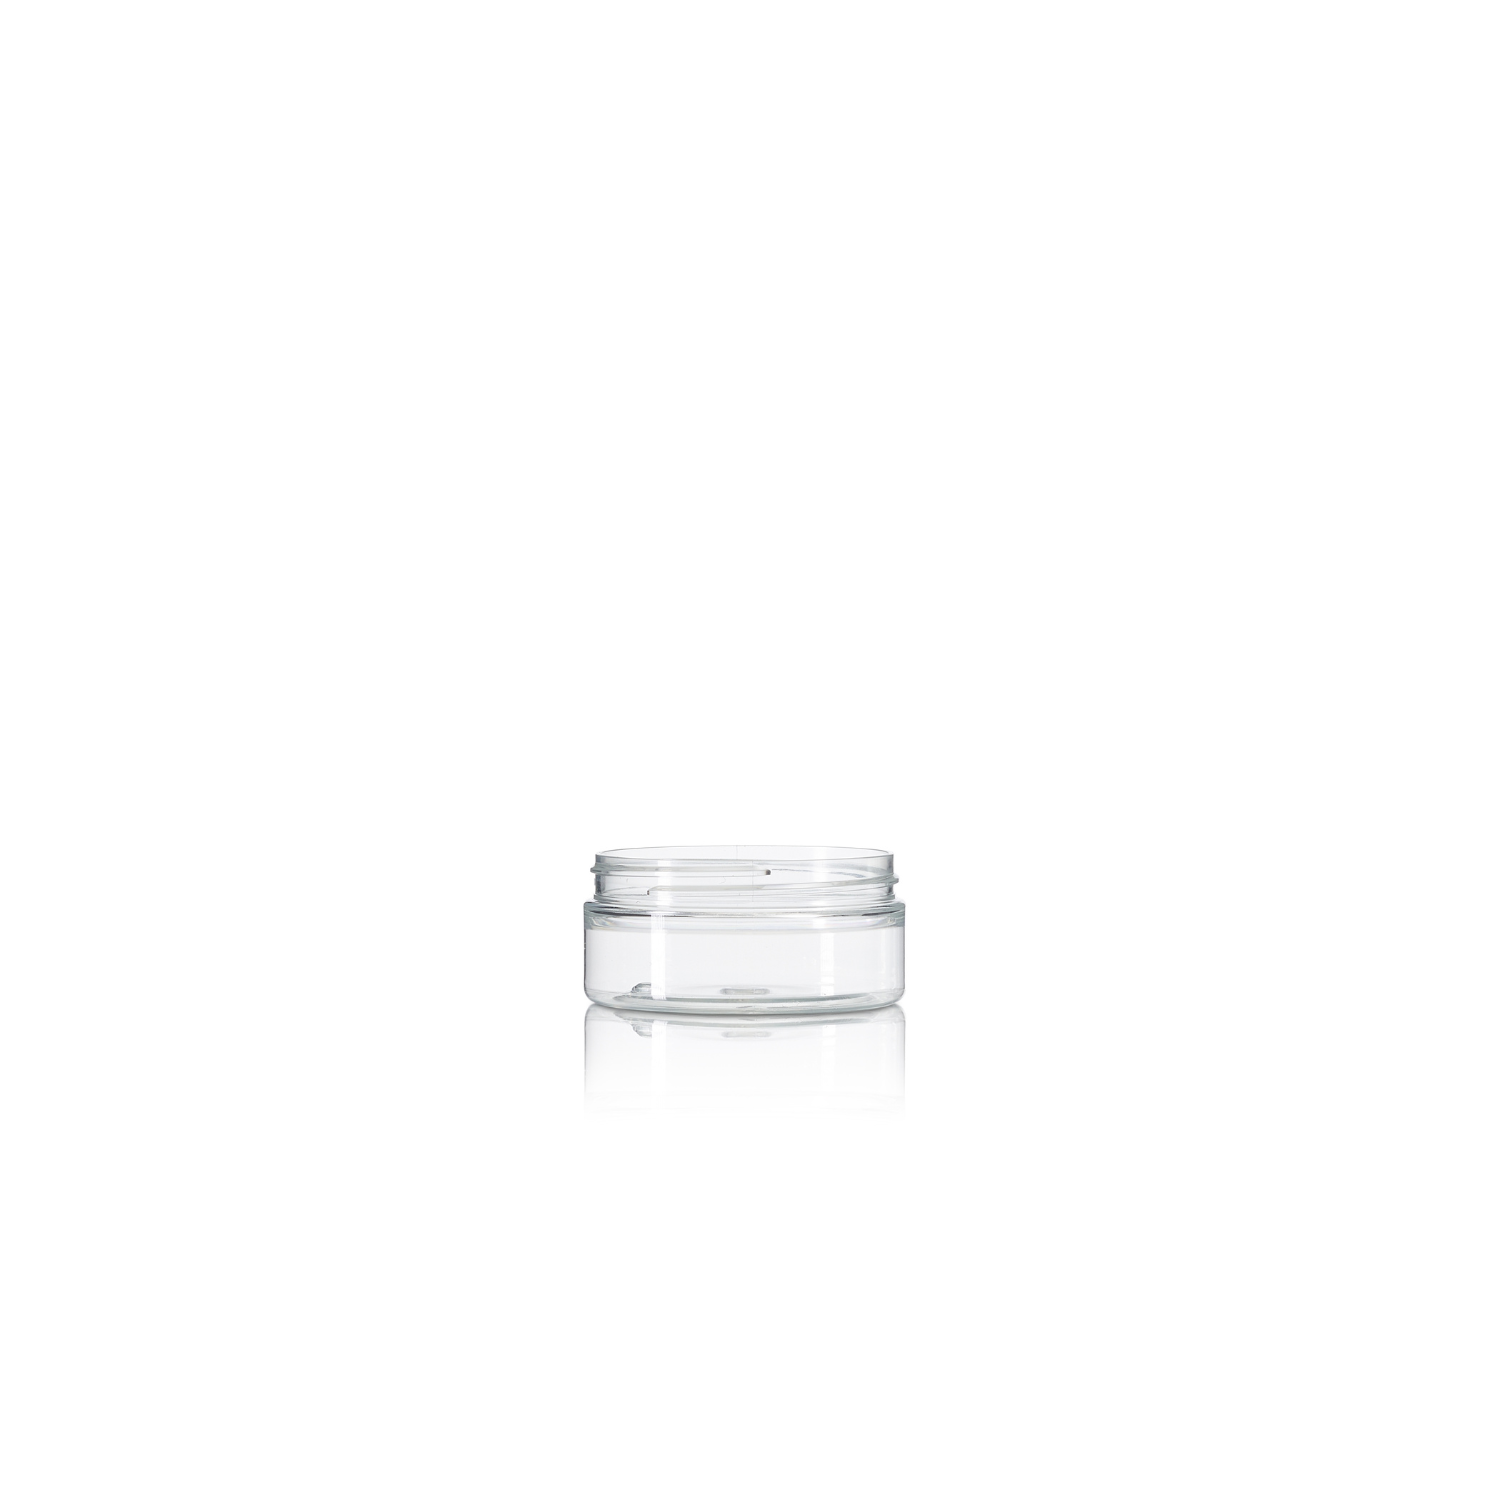 75ml Clear PET Straight-Sided Jar - 70/400 neck